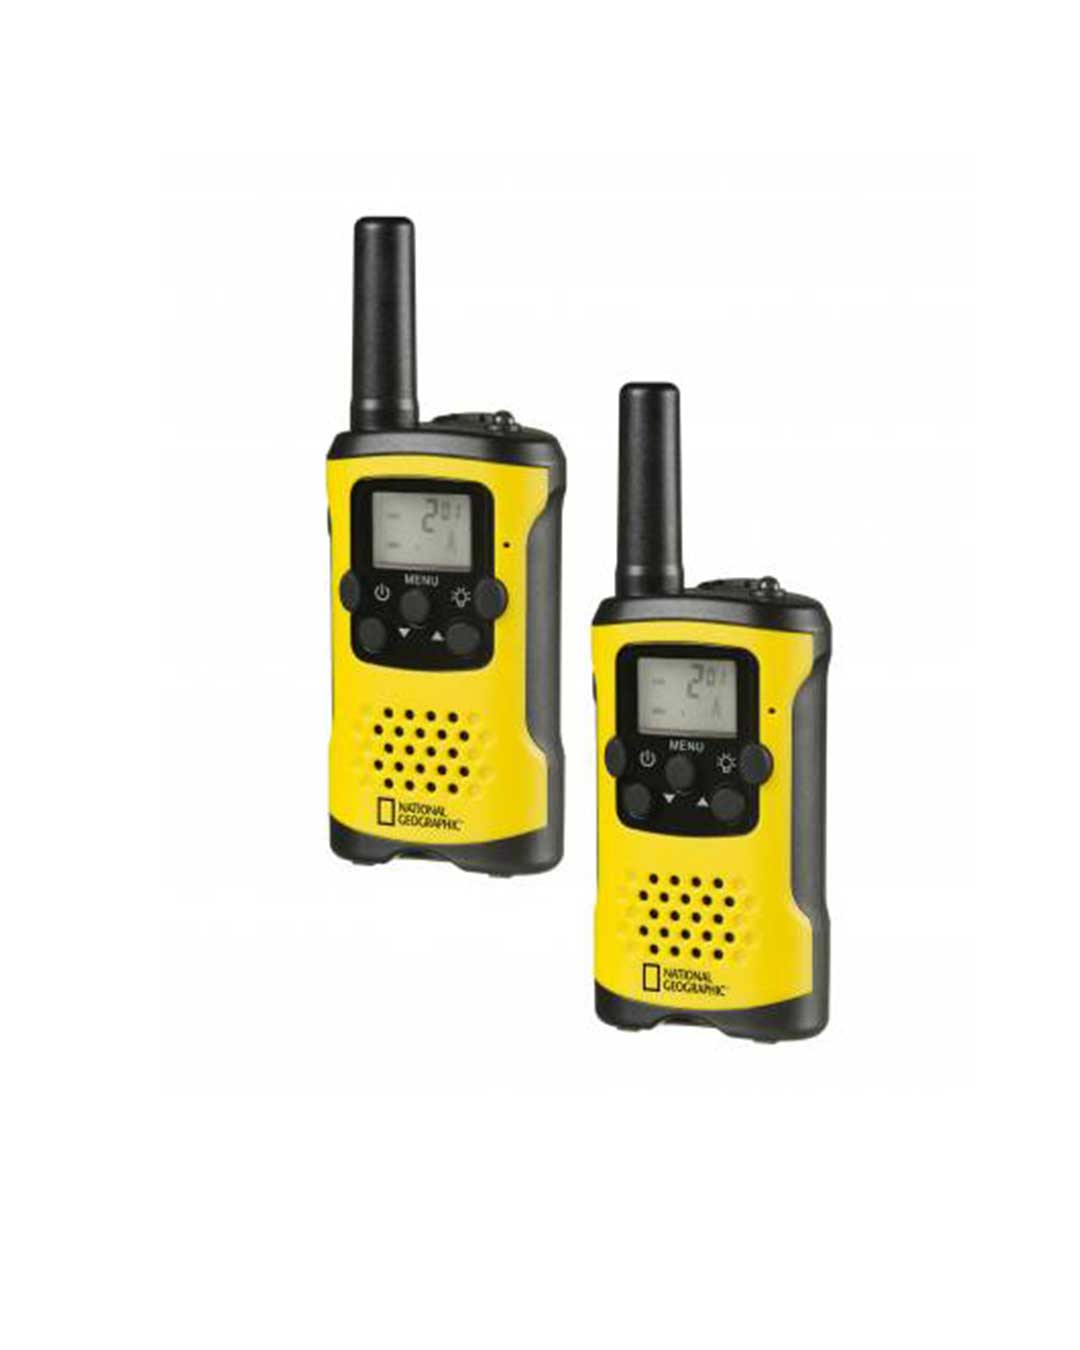 Juego de walkie-talkies National Geographic Chile